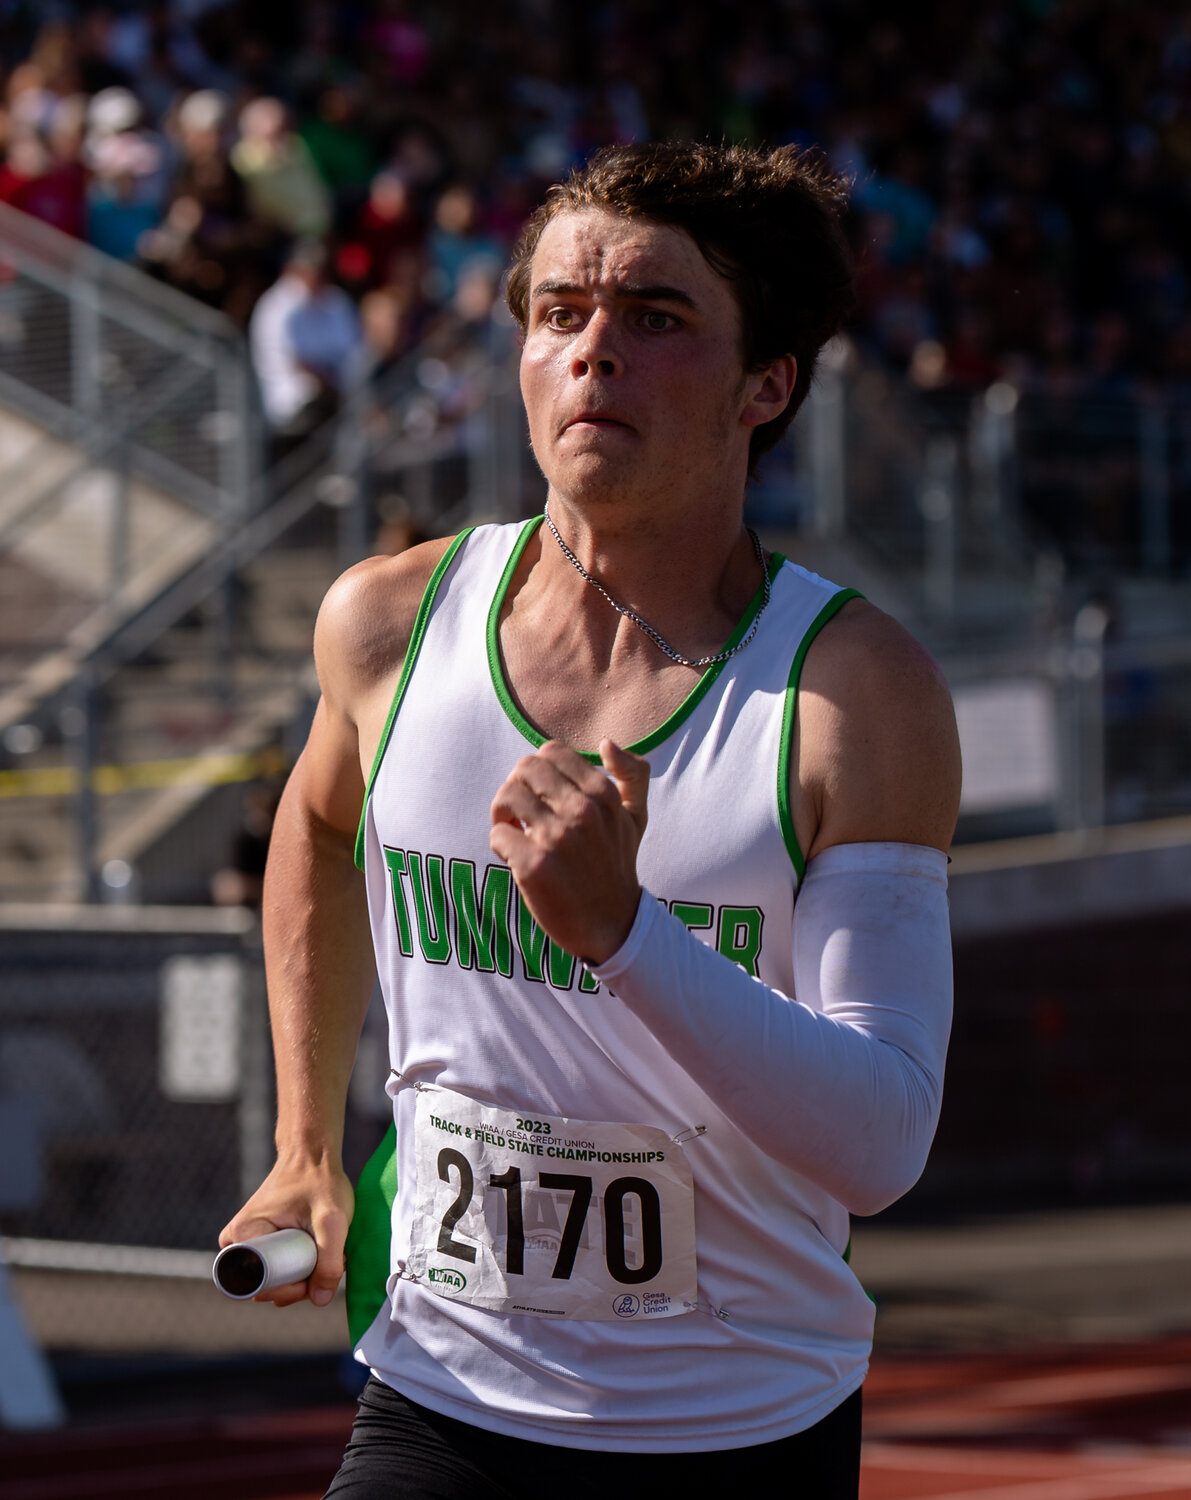 Tumwater’s Christian Schlecht runs the third leg of the 4x400 relay at the WIAA 2A/3A/4A State Track and Field Championships on Saturday, May 27, 2023, at Mount Tahoma High School in Tacoma. (Joshua Hart/For The Chronicle)